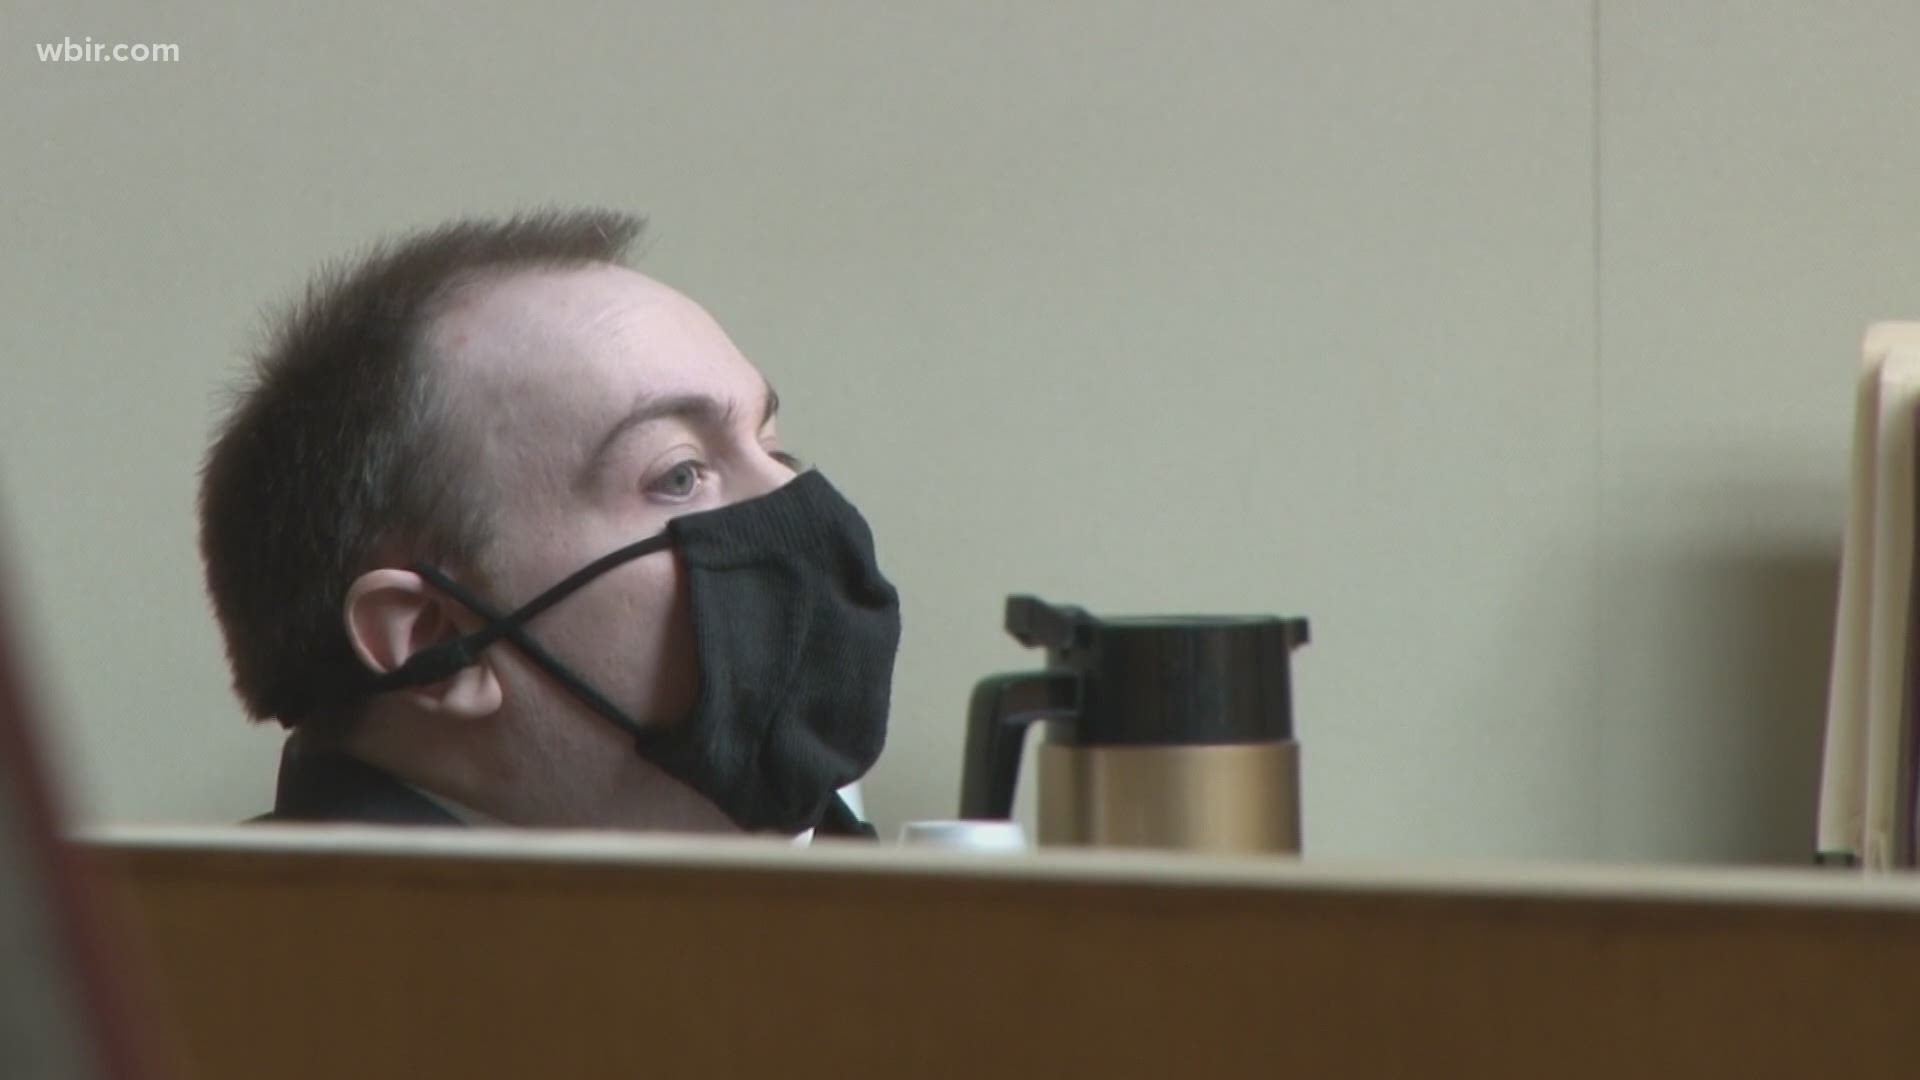 Jury selection is set to begin tomorrow morning for the trial of a man accused of killing and dismembering his parents.